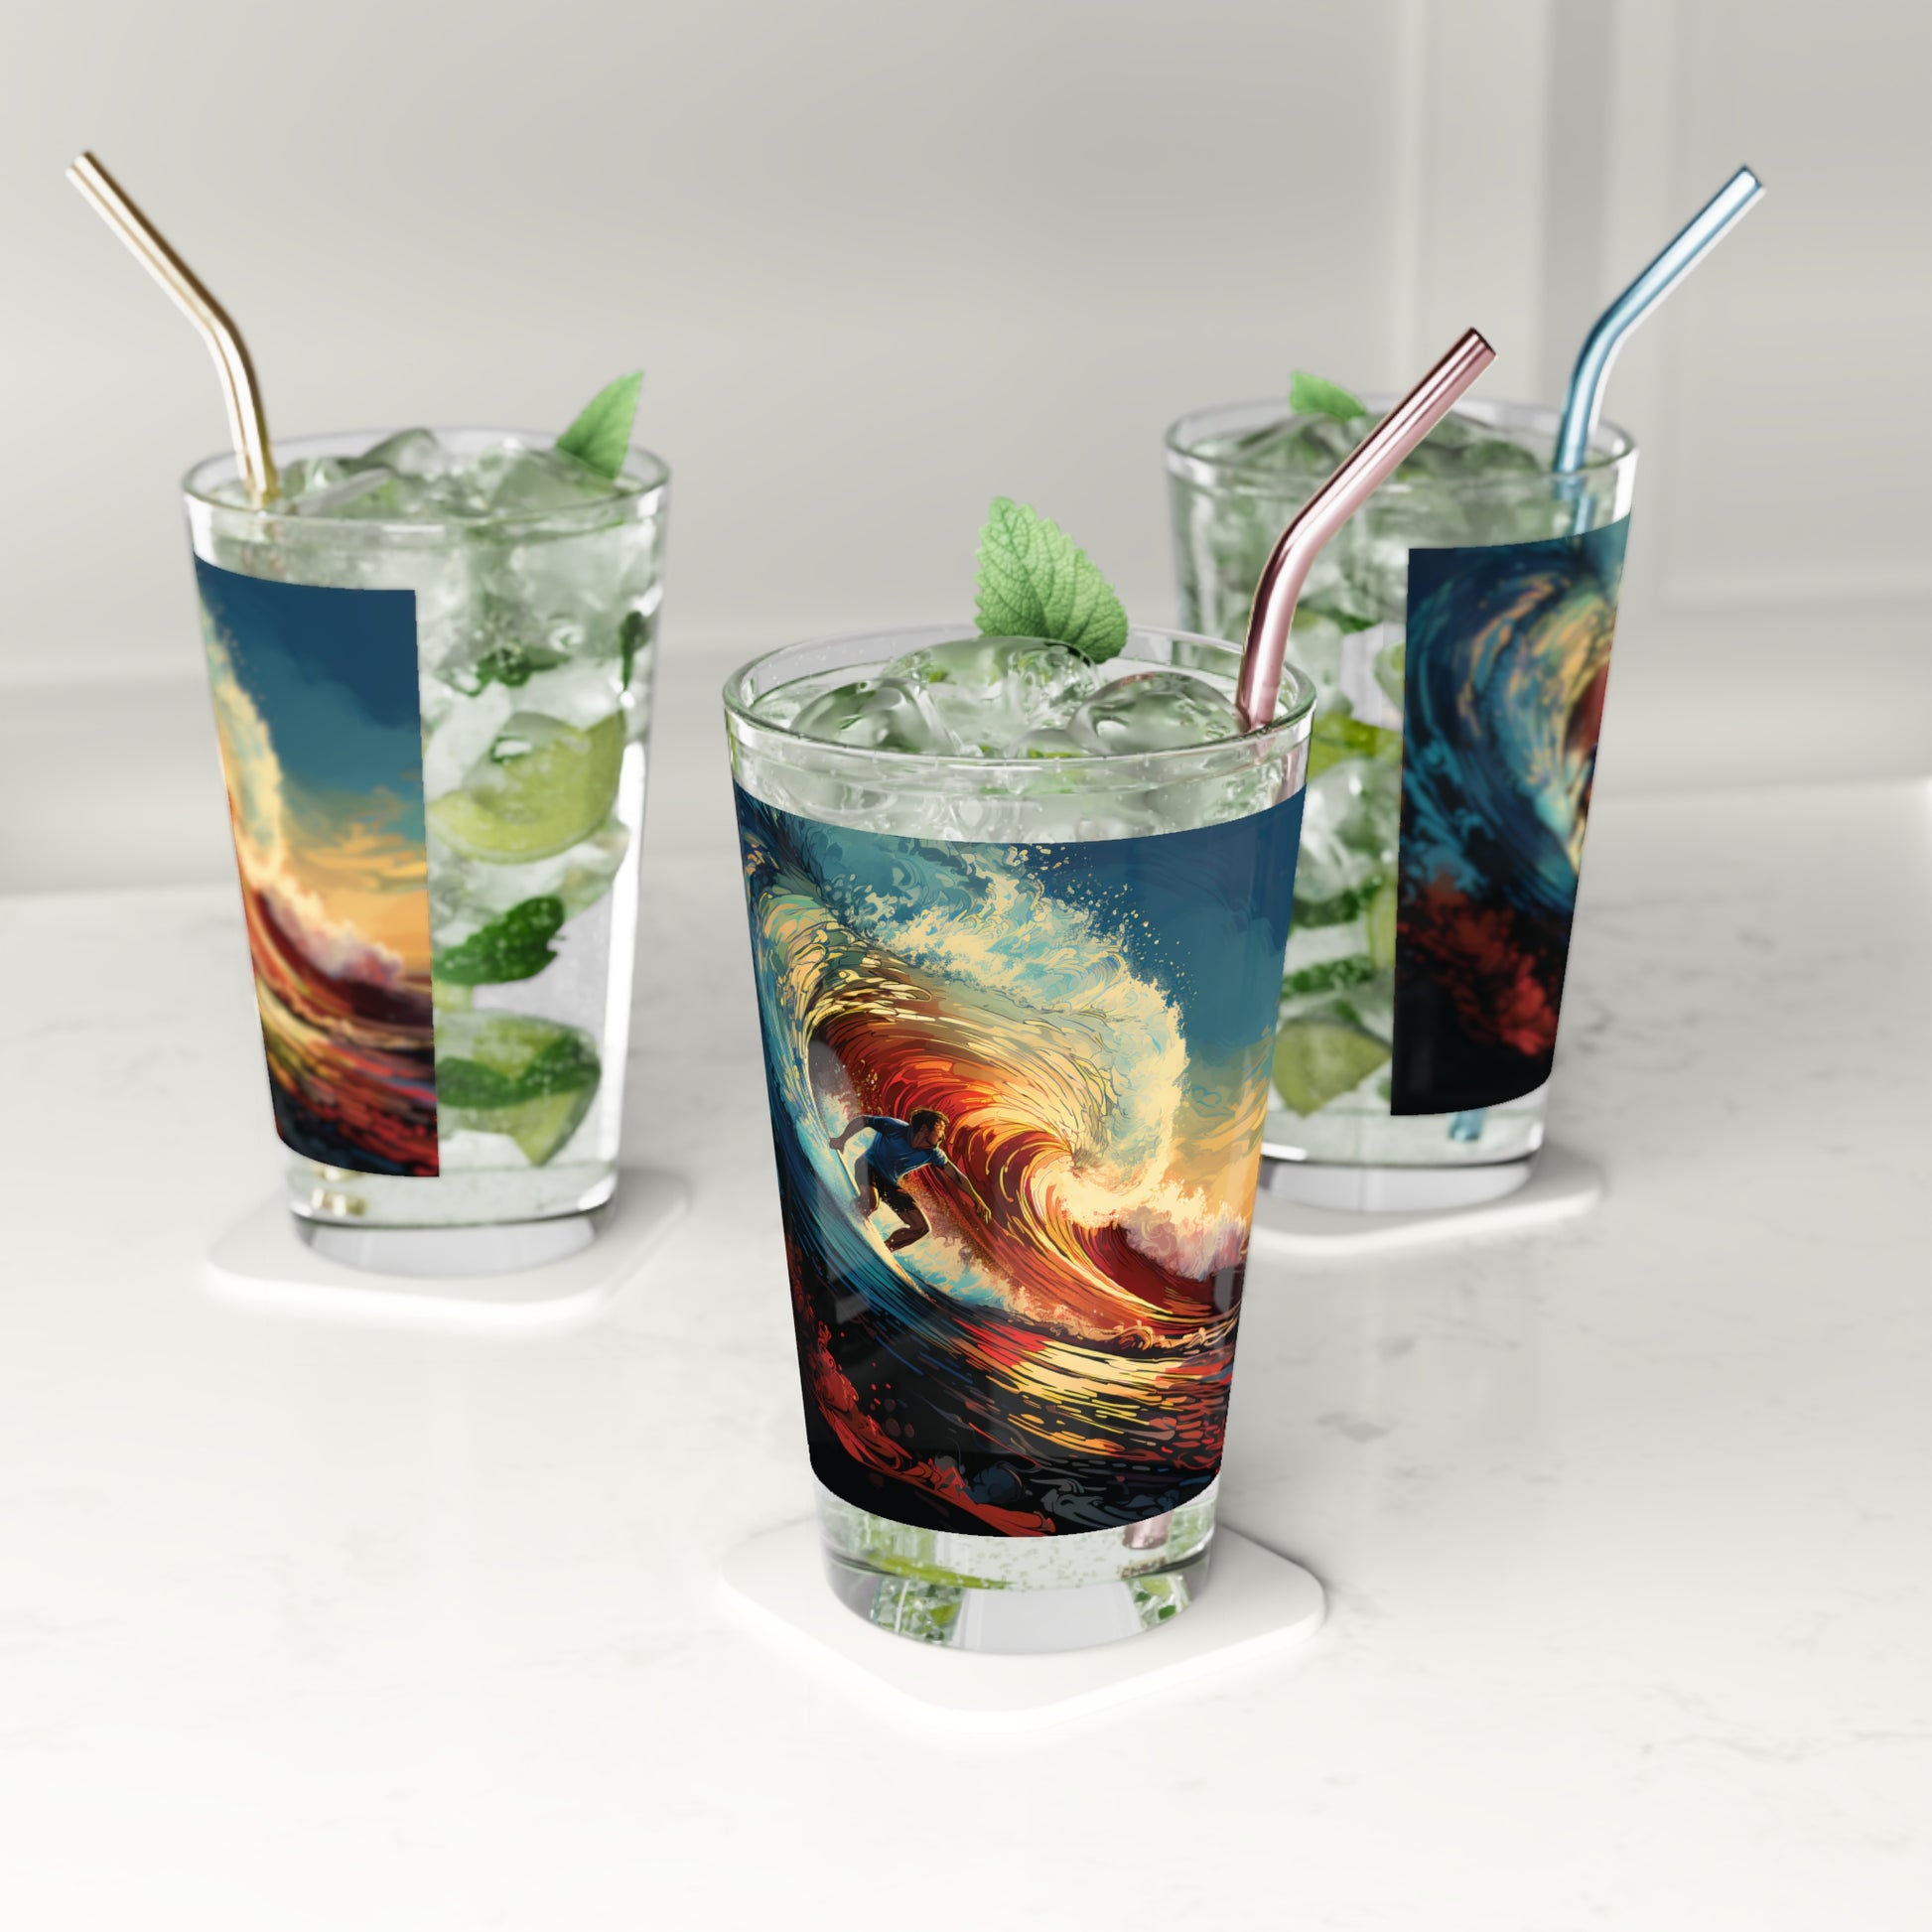 Dive into the mesmerizing world of Surfing Color Waves with our 16oz Pint Glass. Waves Design #019 brings the dynamic hues of the ocean right to your fingertips, a true masterpiece.